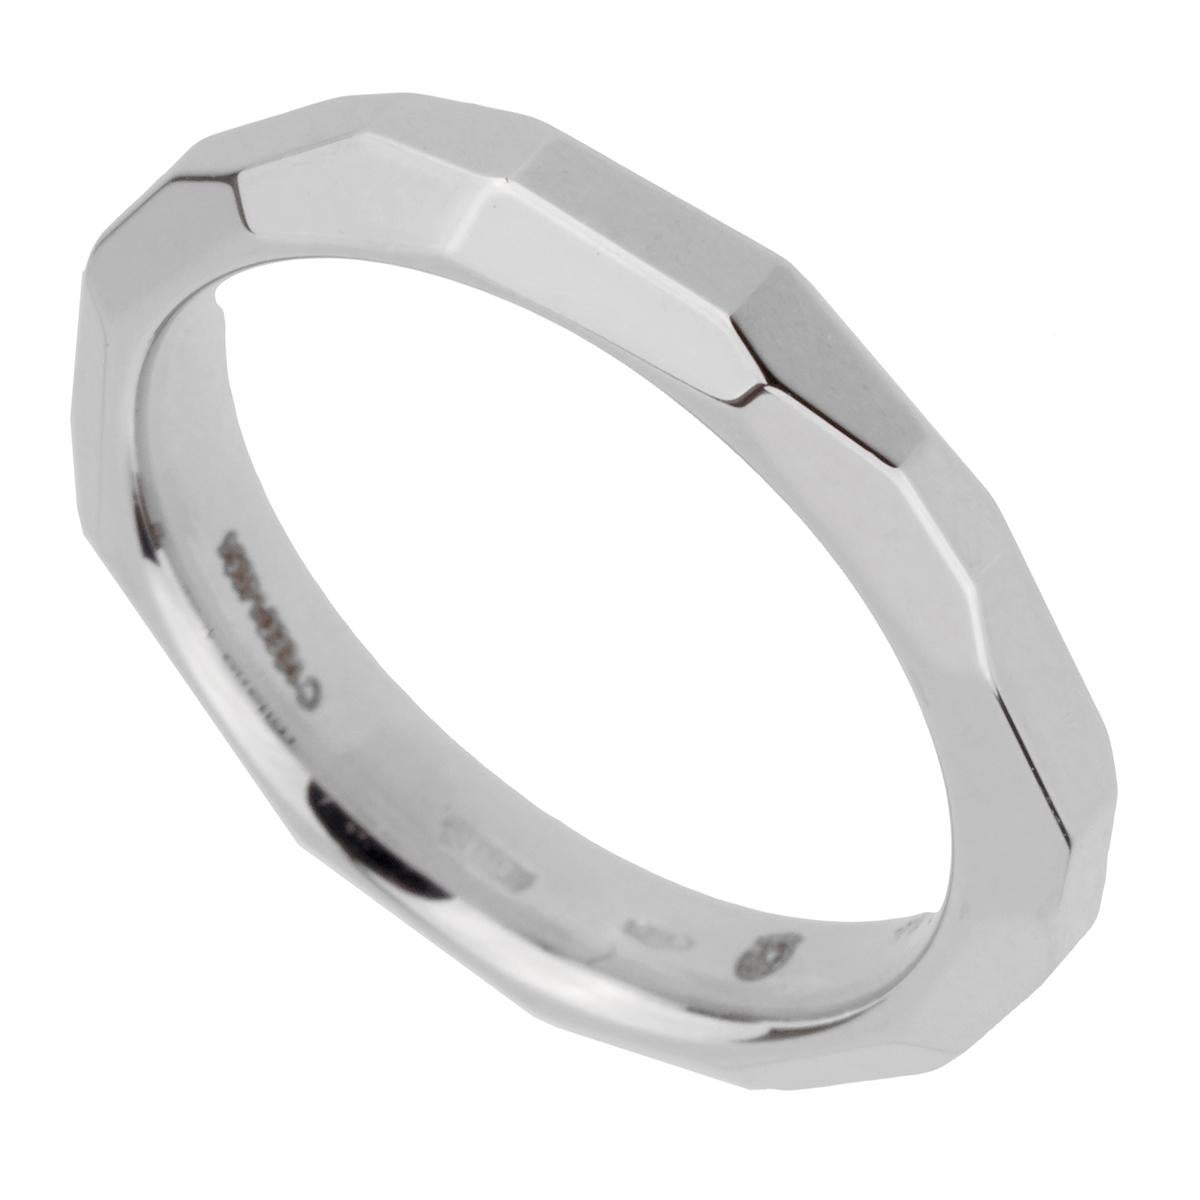 A chic white gold Pomellato band style ring crafted in 18k white gold, The ring measures a size 6.25 and can be resized.

Sku: 2383